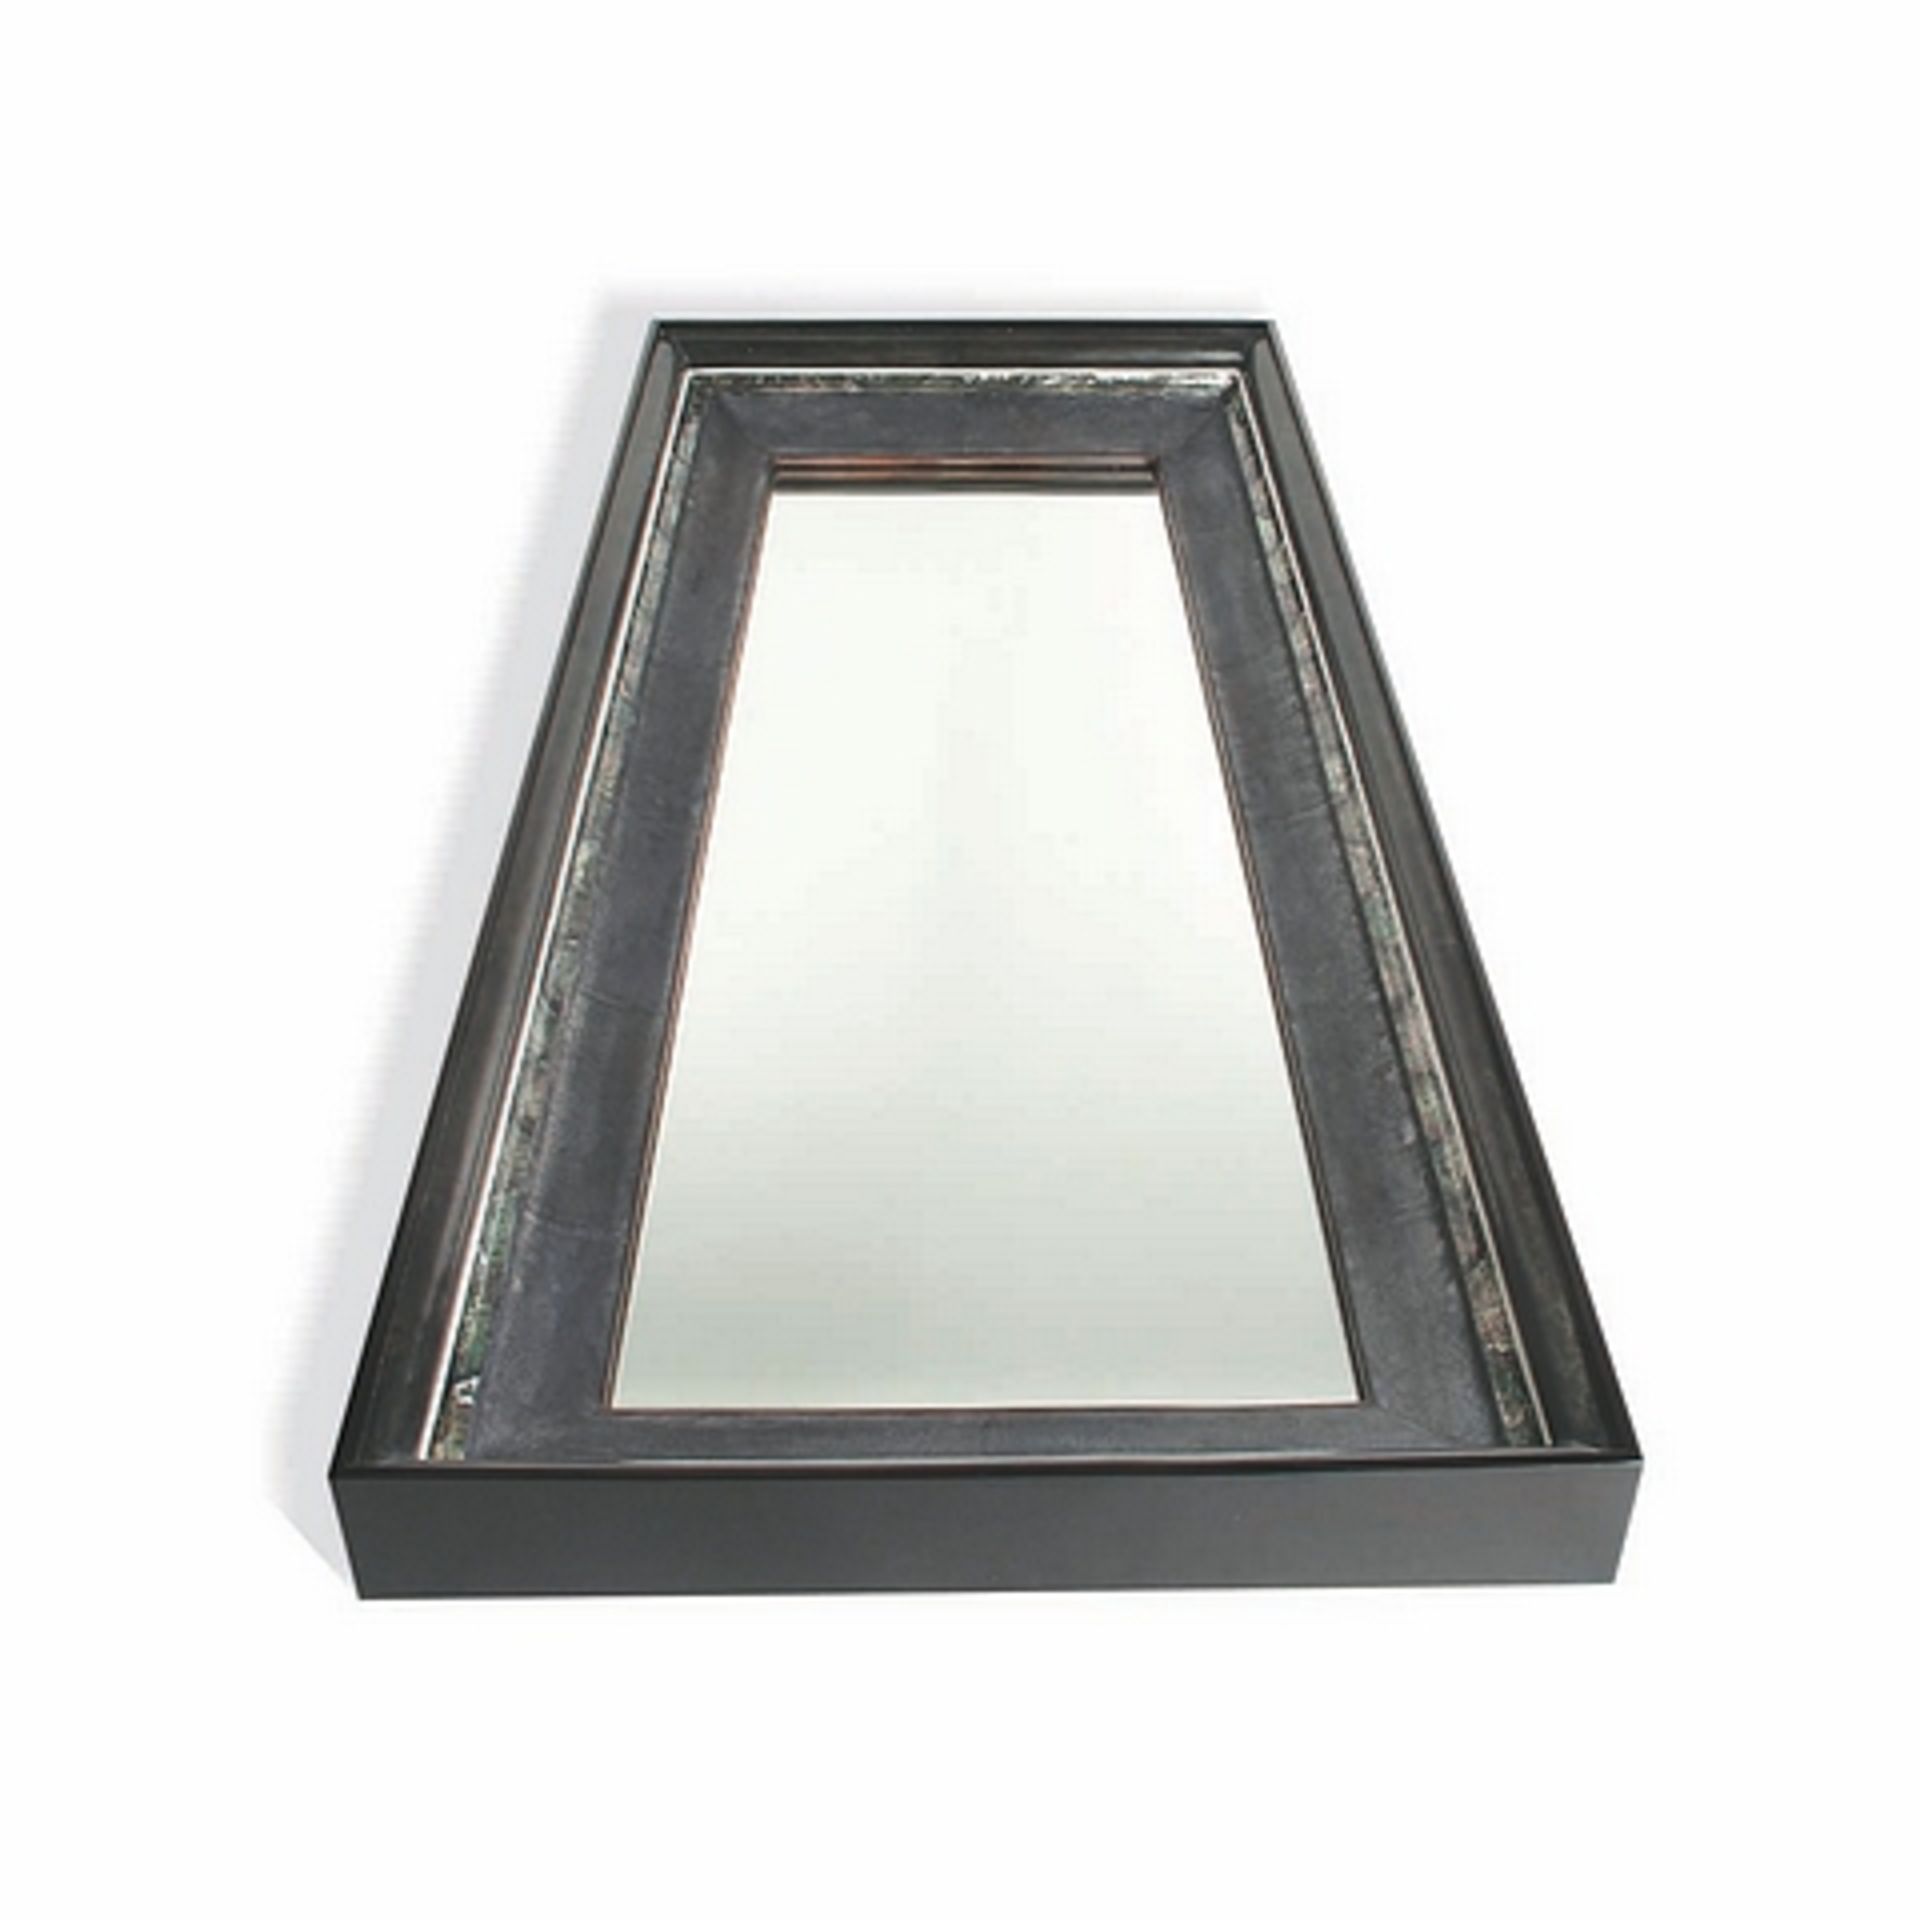 Vulgan Mirror channels an exotic attitude with a sleek clean lined profile giving it a distinctive - Image 2 of 2